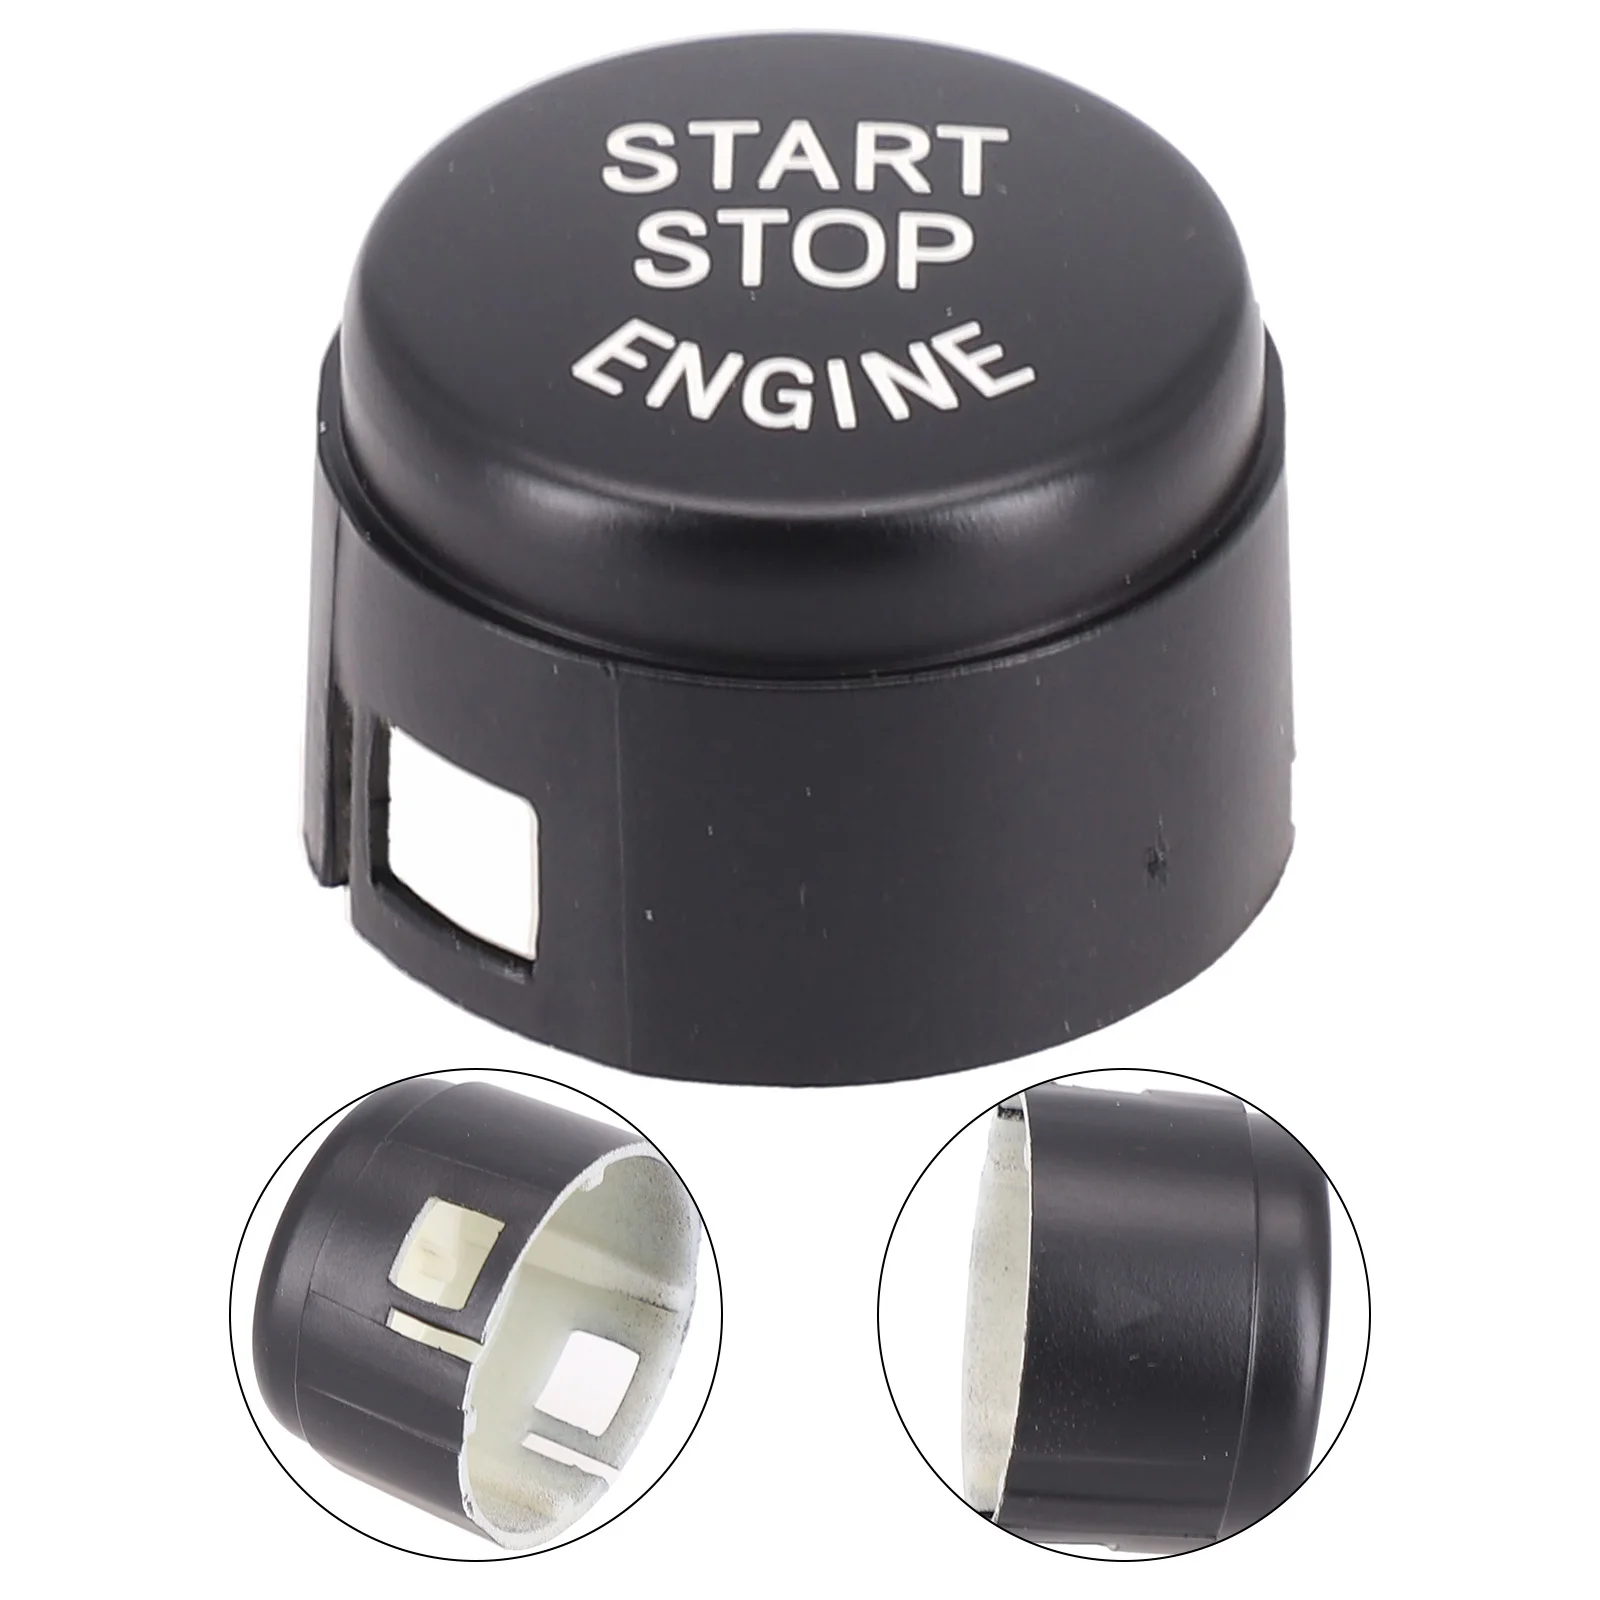 

Enhance Your For BMW Experience with this Start Stop Engine Button Switch Cover for F01 F02 F10 F11 F12 200913